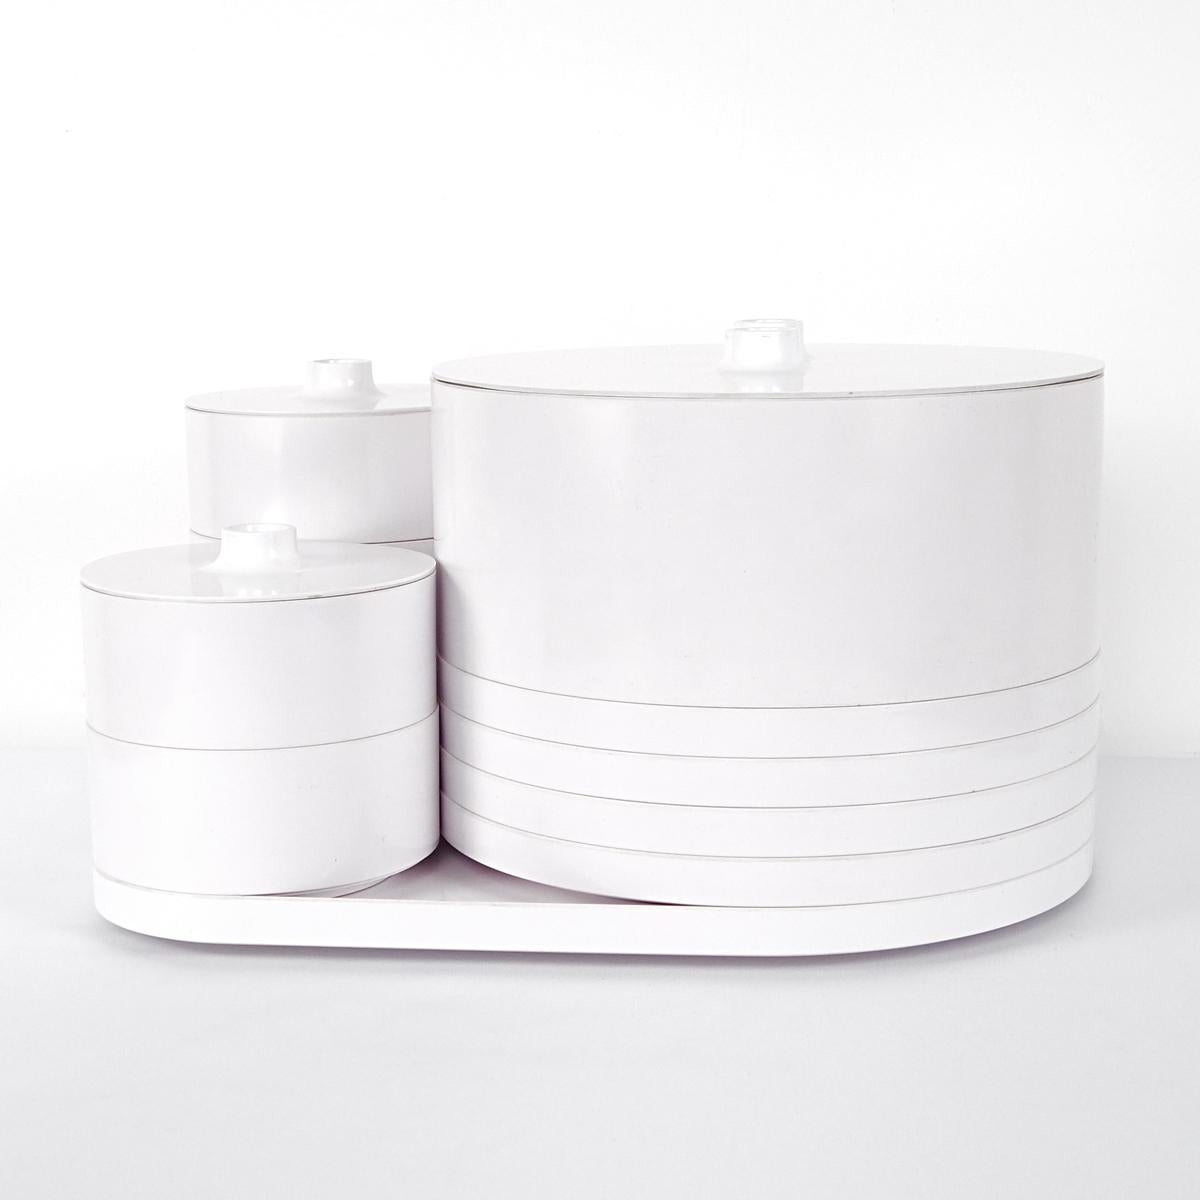 Dinnerware set made of melamine designed in 1964. Because of its material, compactness, stackability and looks this has become an iconic design. It is in the permanent collection of the Museum of Modern Art, the Metropolitan Museum and the